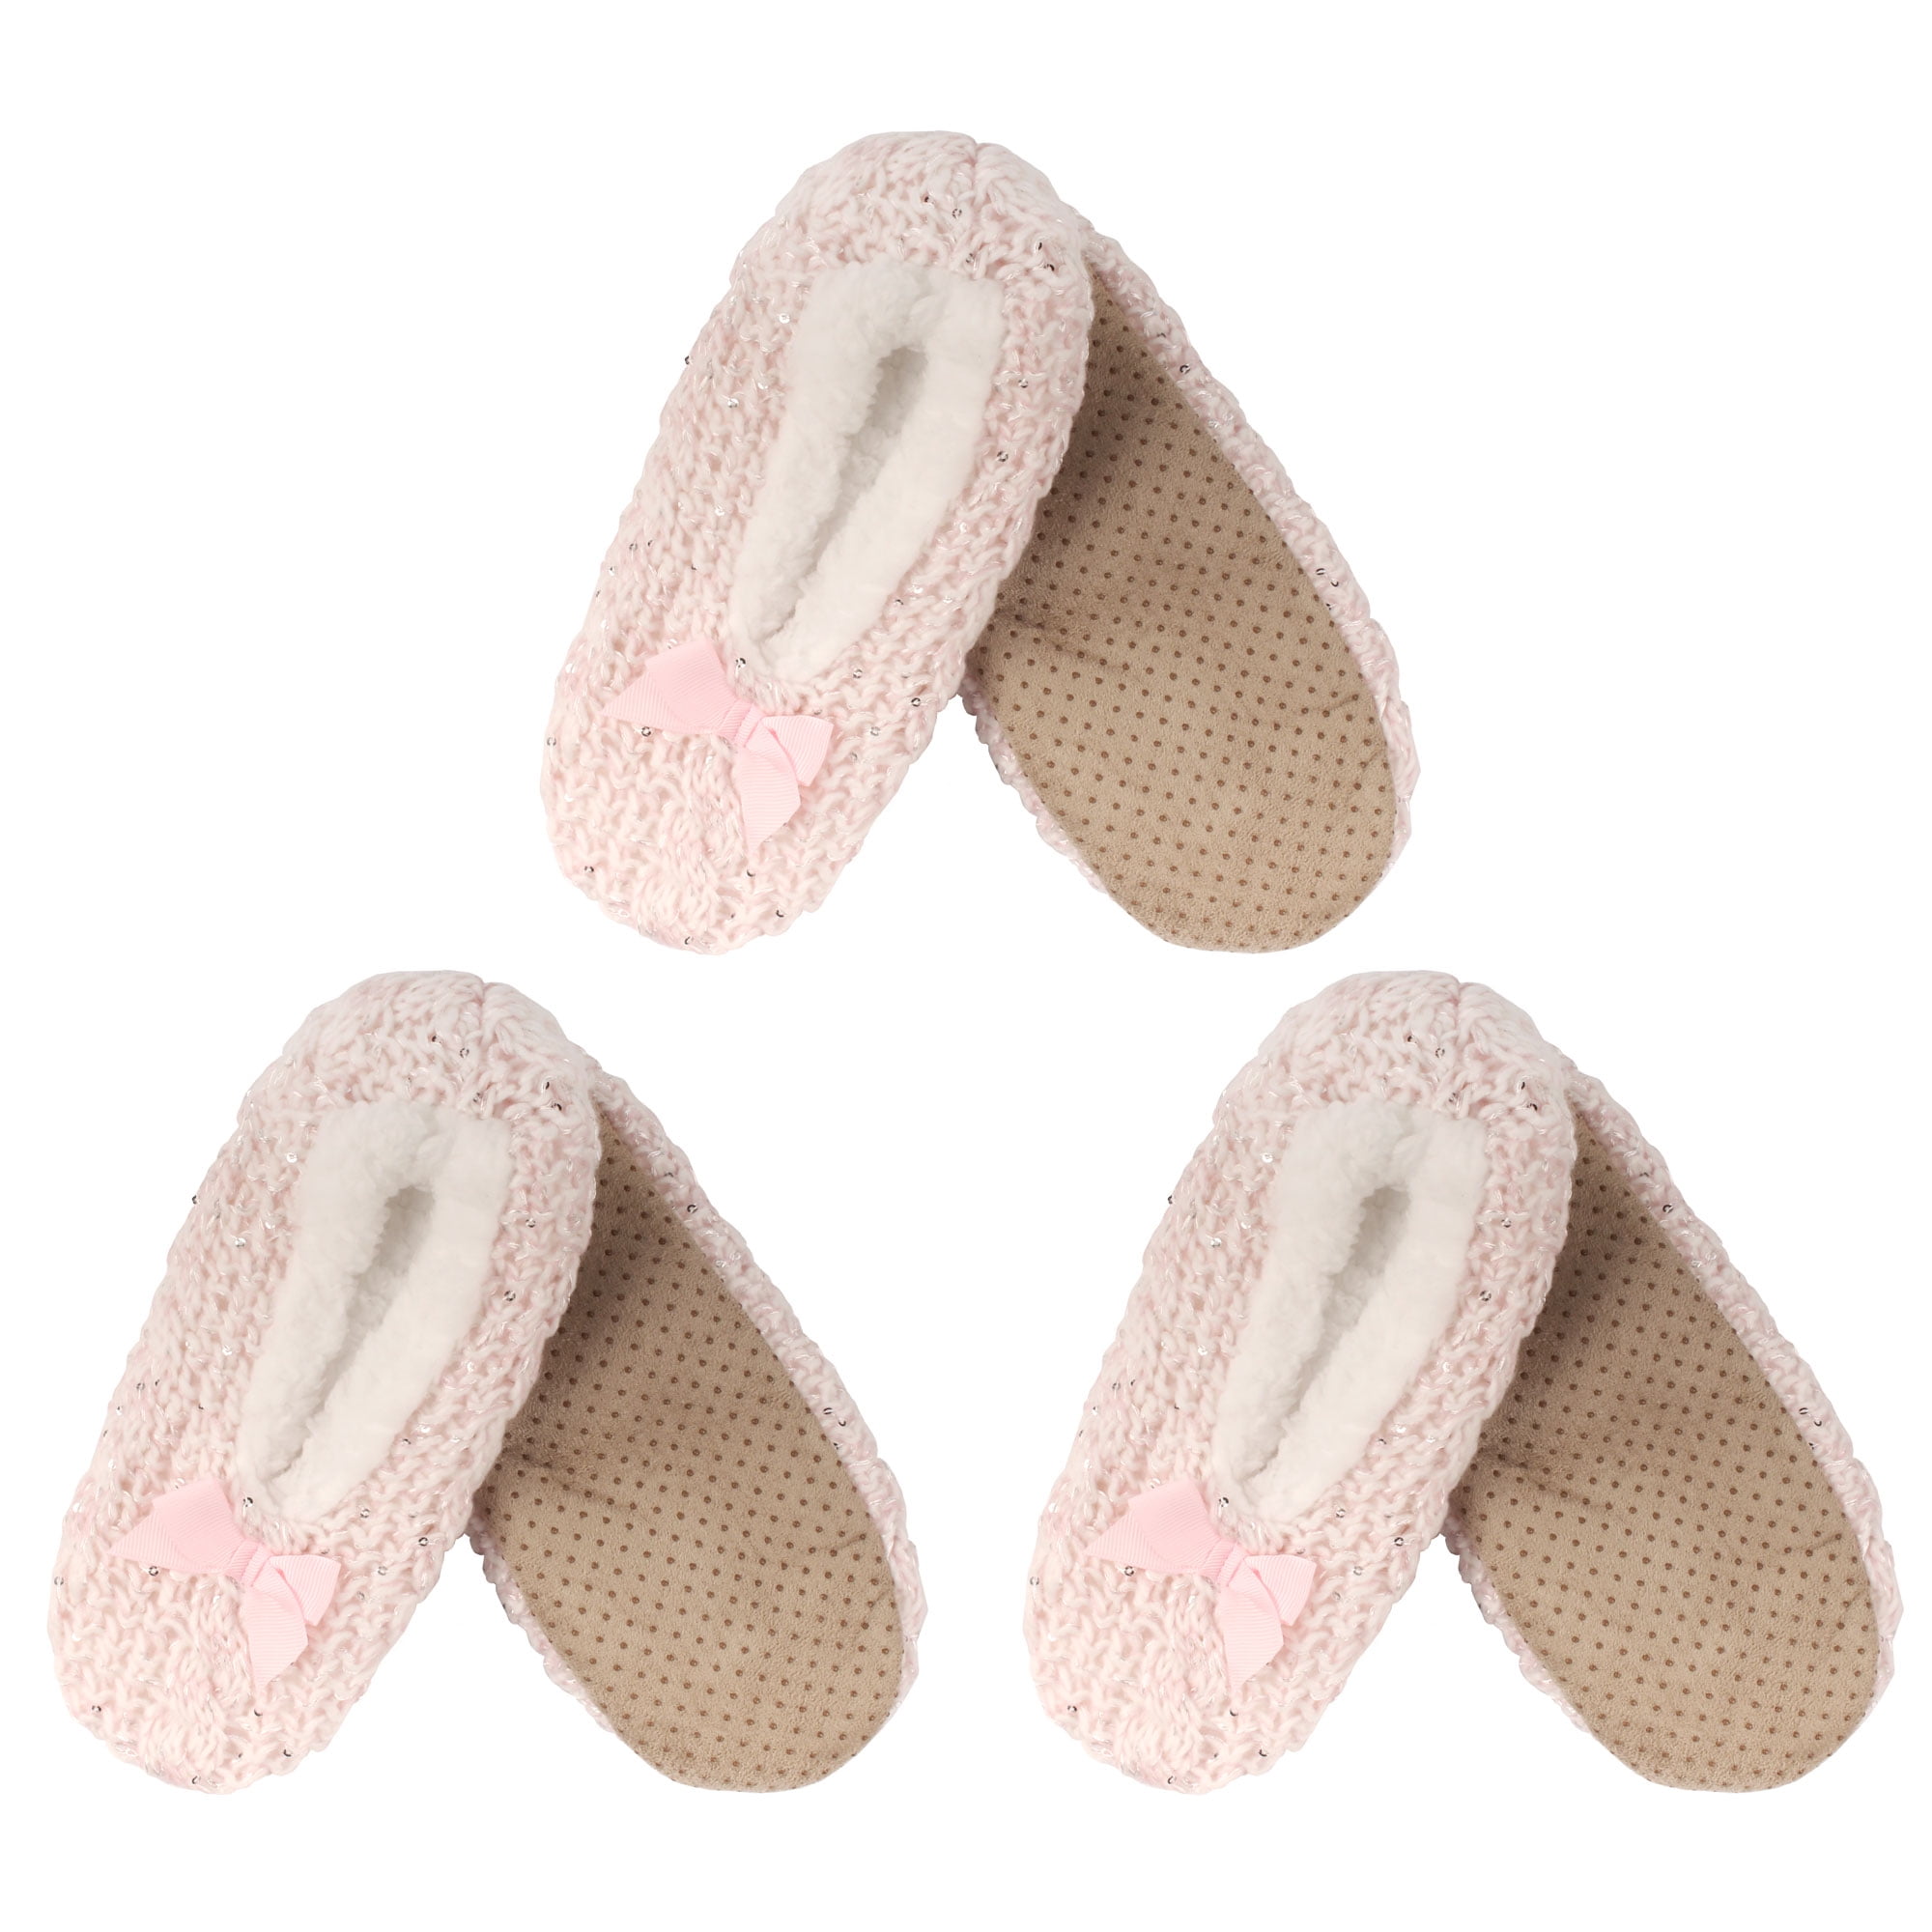 3 Pairs Infant/Toddler Warm Fuzzy Slippers 